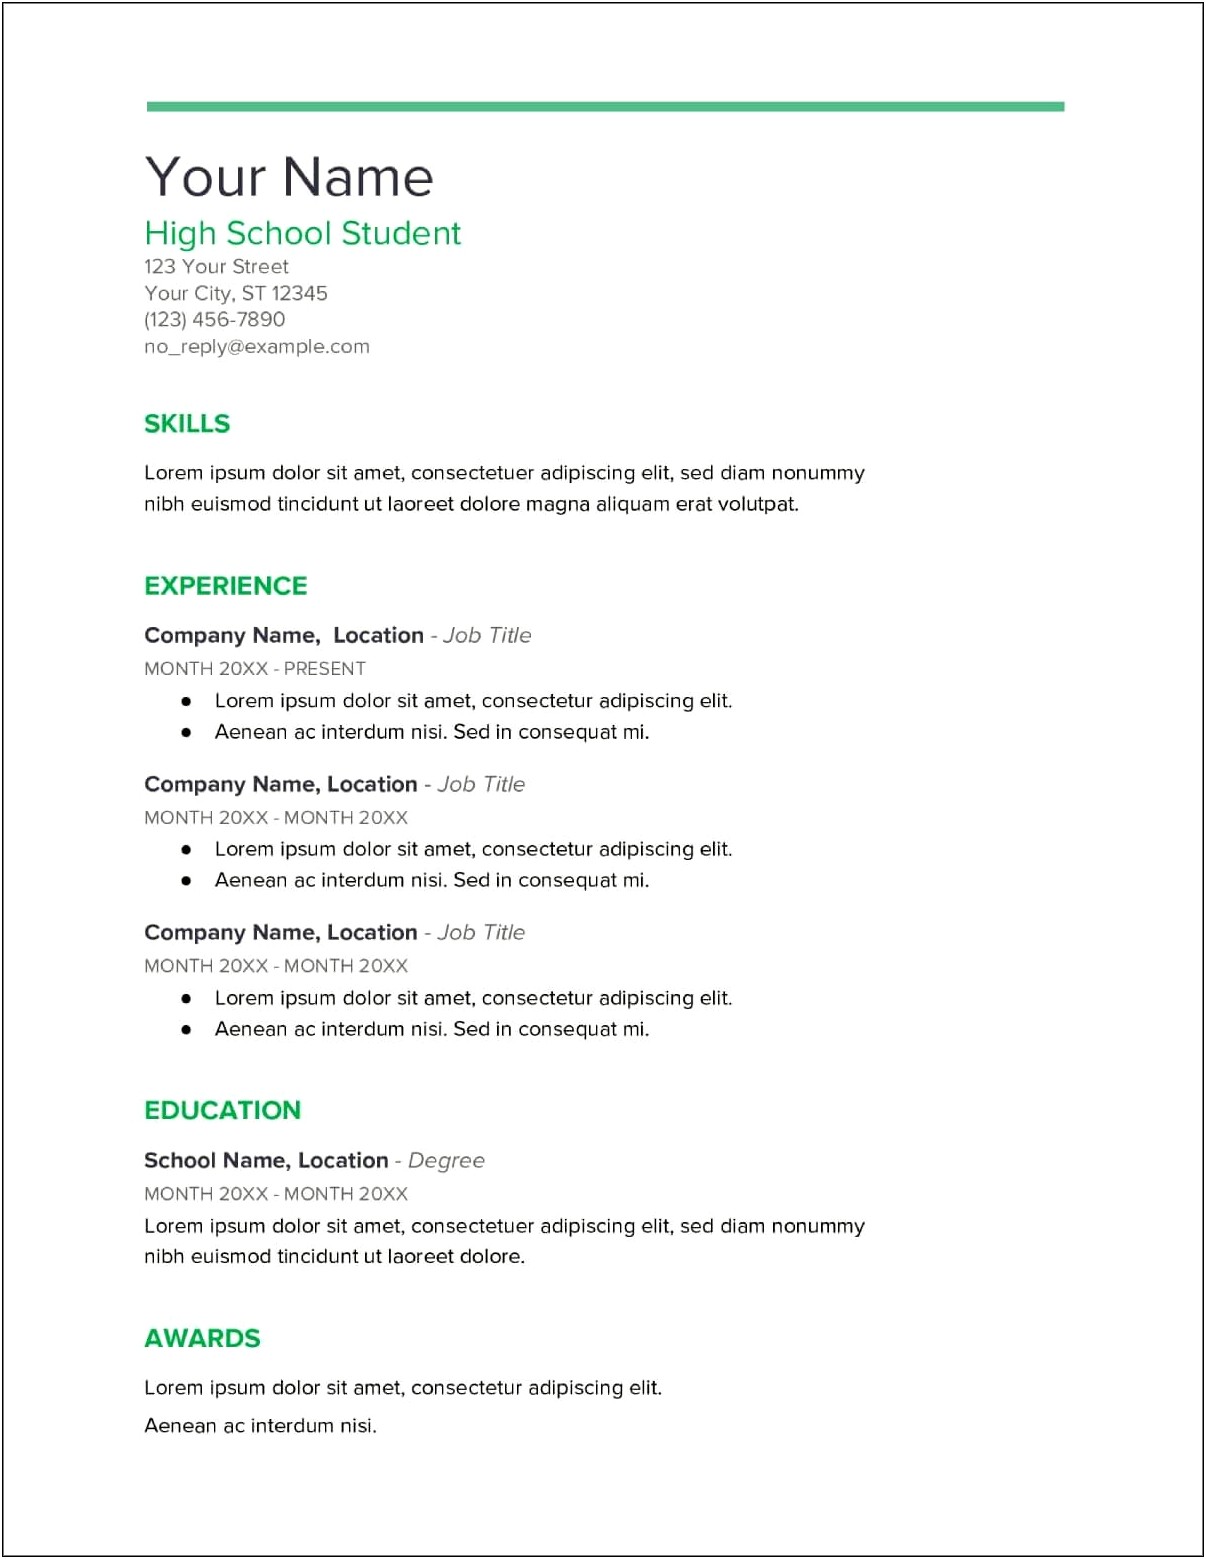 High School Student With One Job Resume Sample